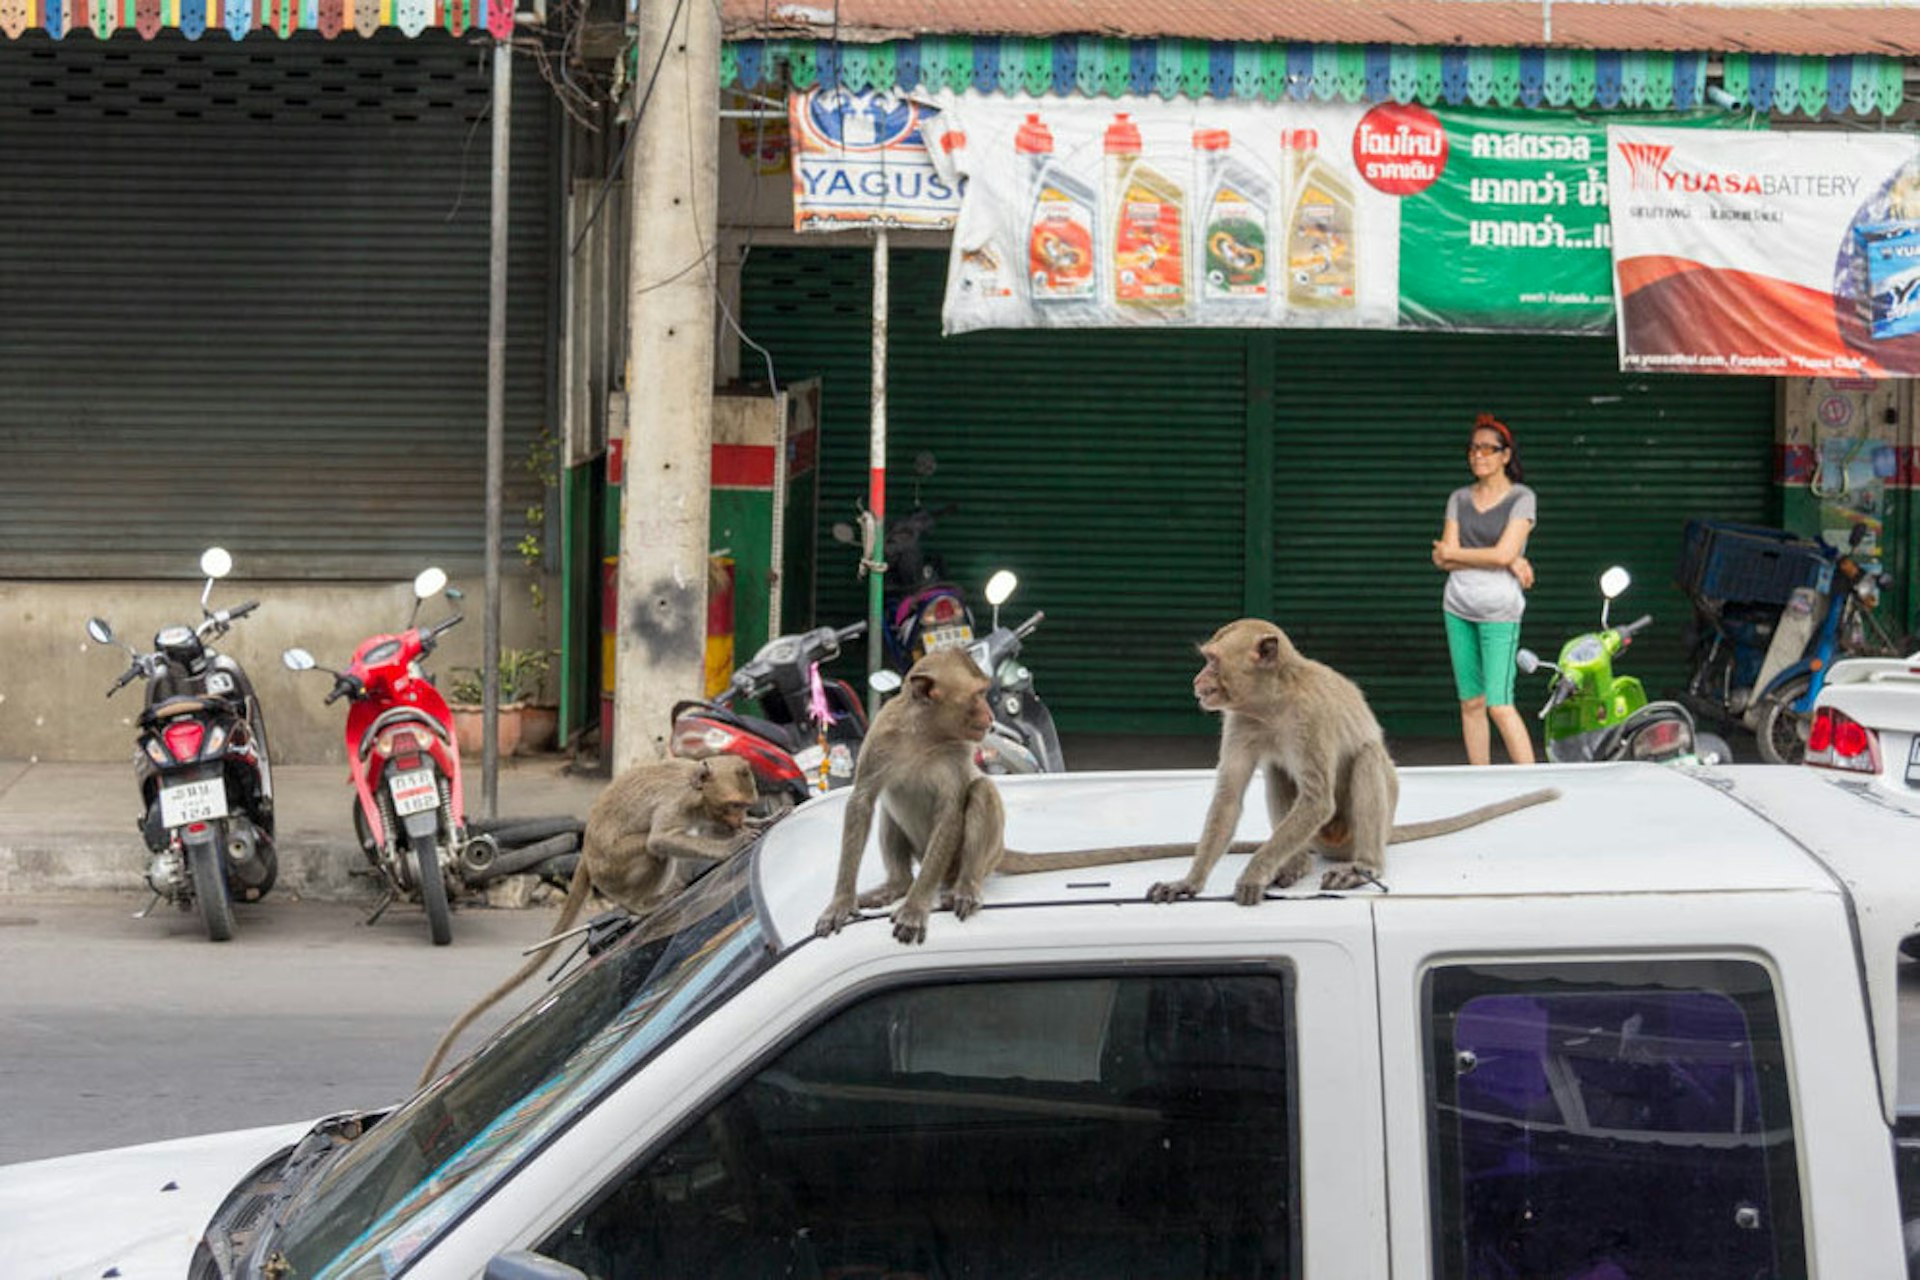 Monkeys make themselves at home on vehicles in Lopburi, Thailand © Tim Bewer / Lonely Planet